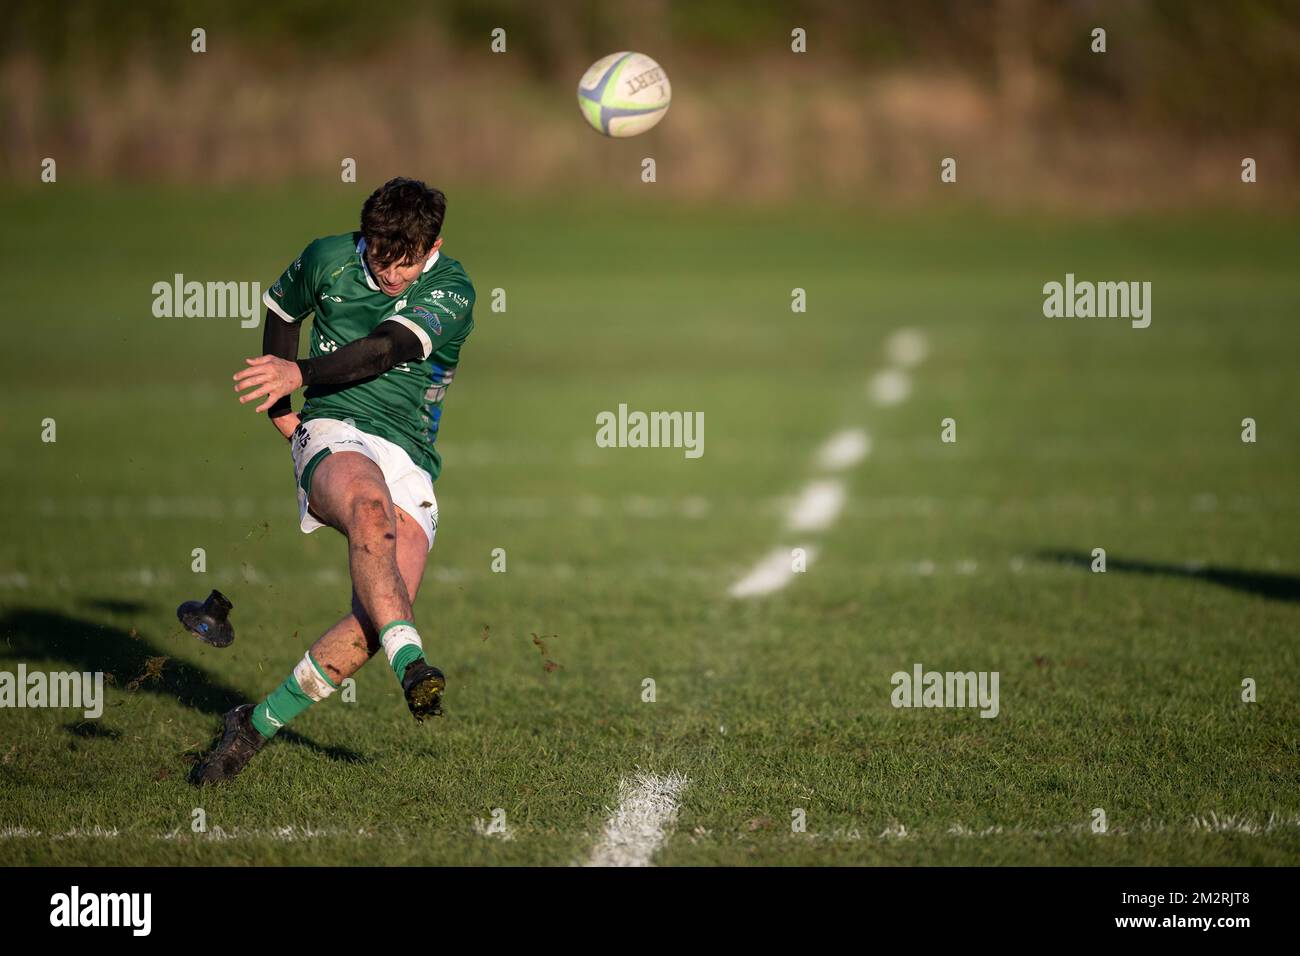 Rugby player converting kick Stock Photo